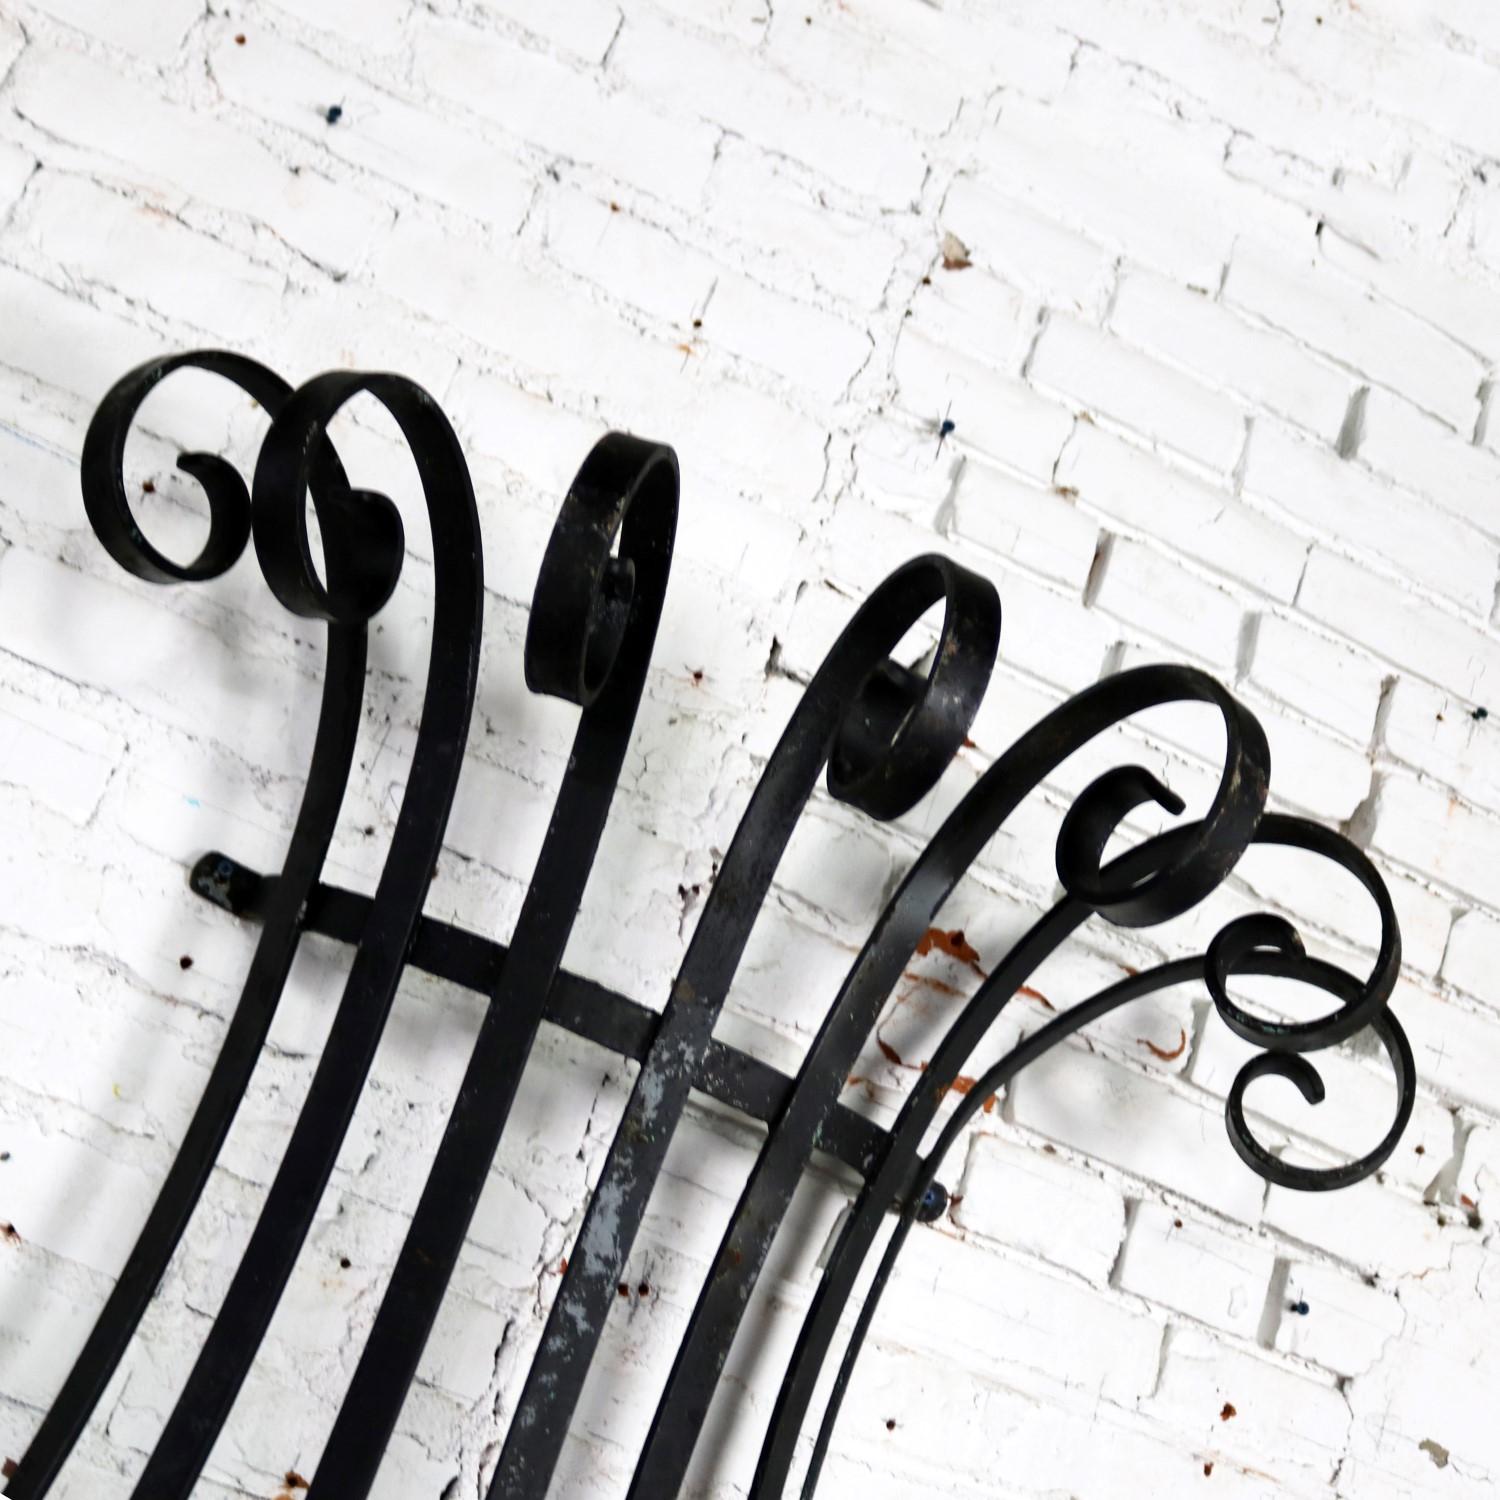 Architectural Antique Window Guards or Wall Urn Planters Hand-Wrought Iron 2